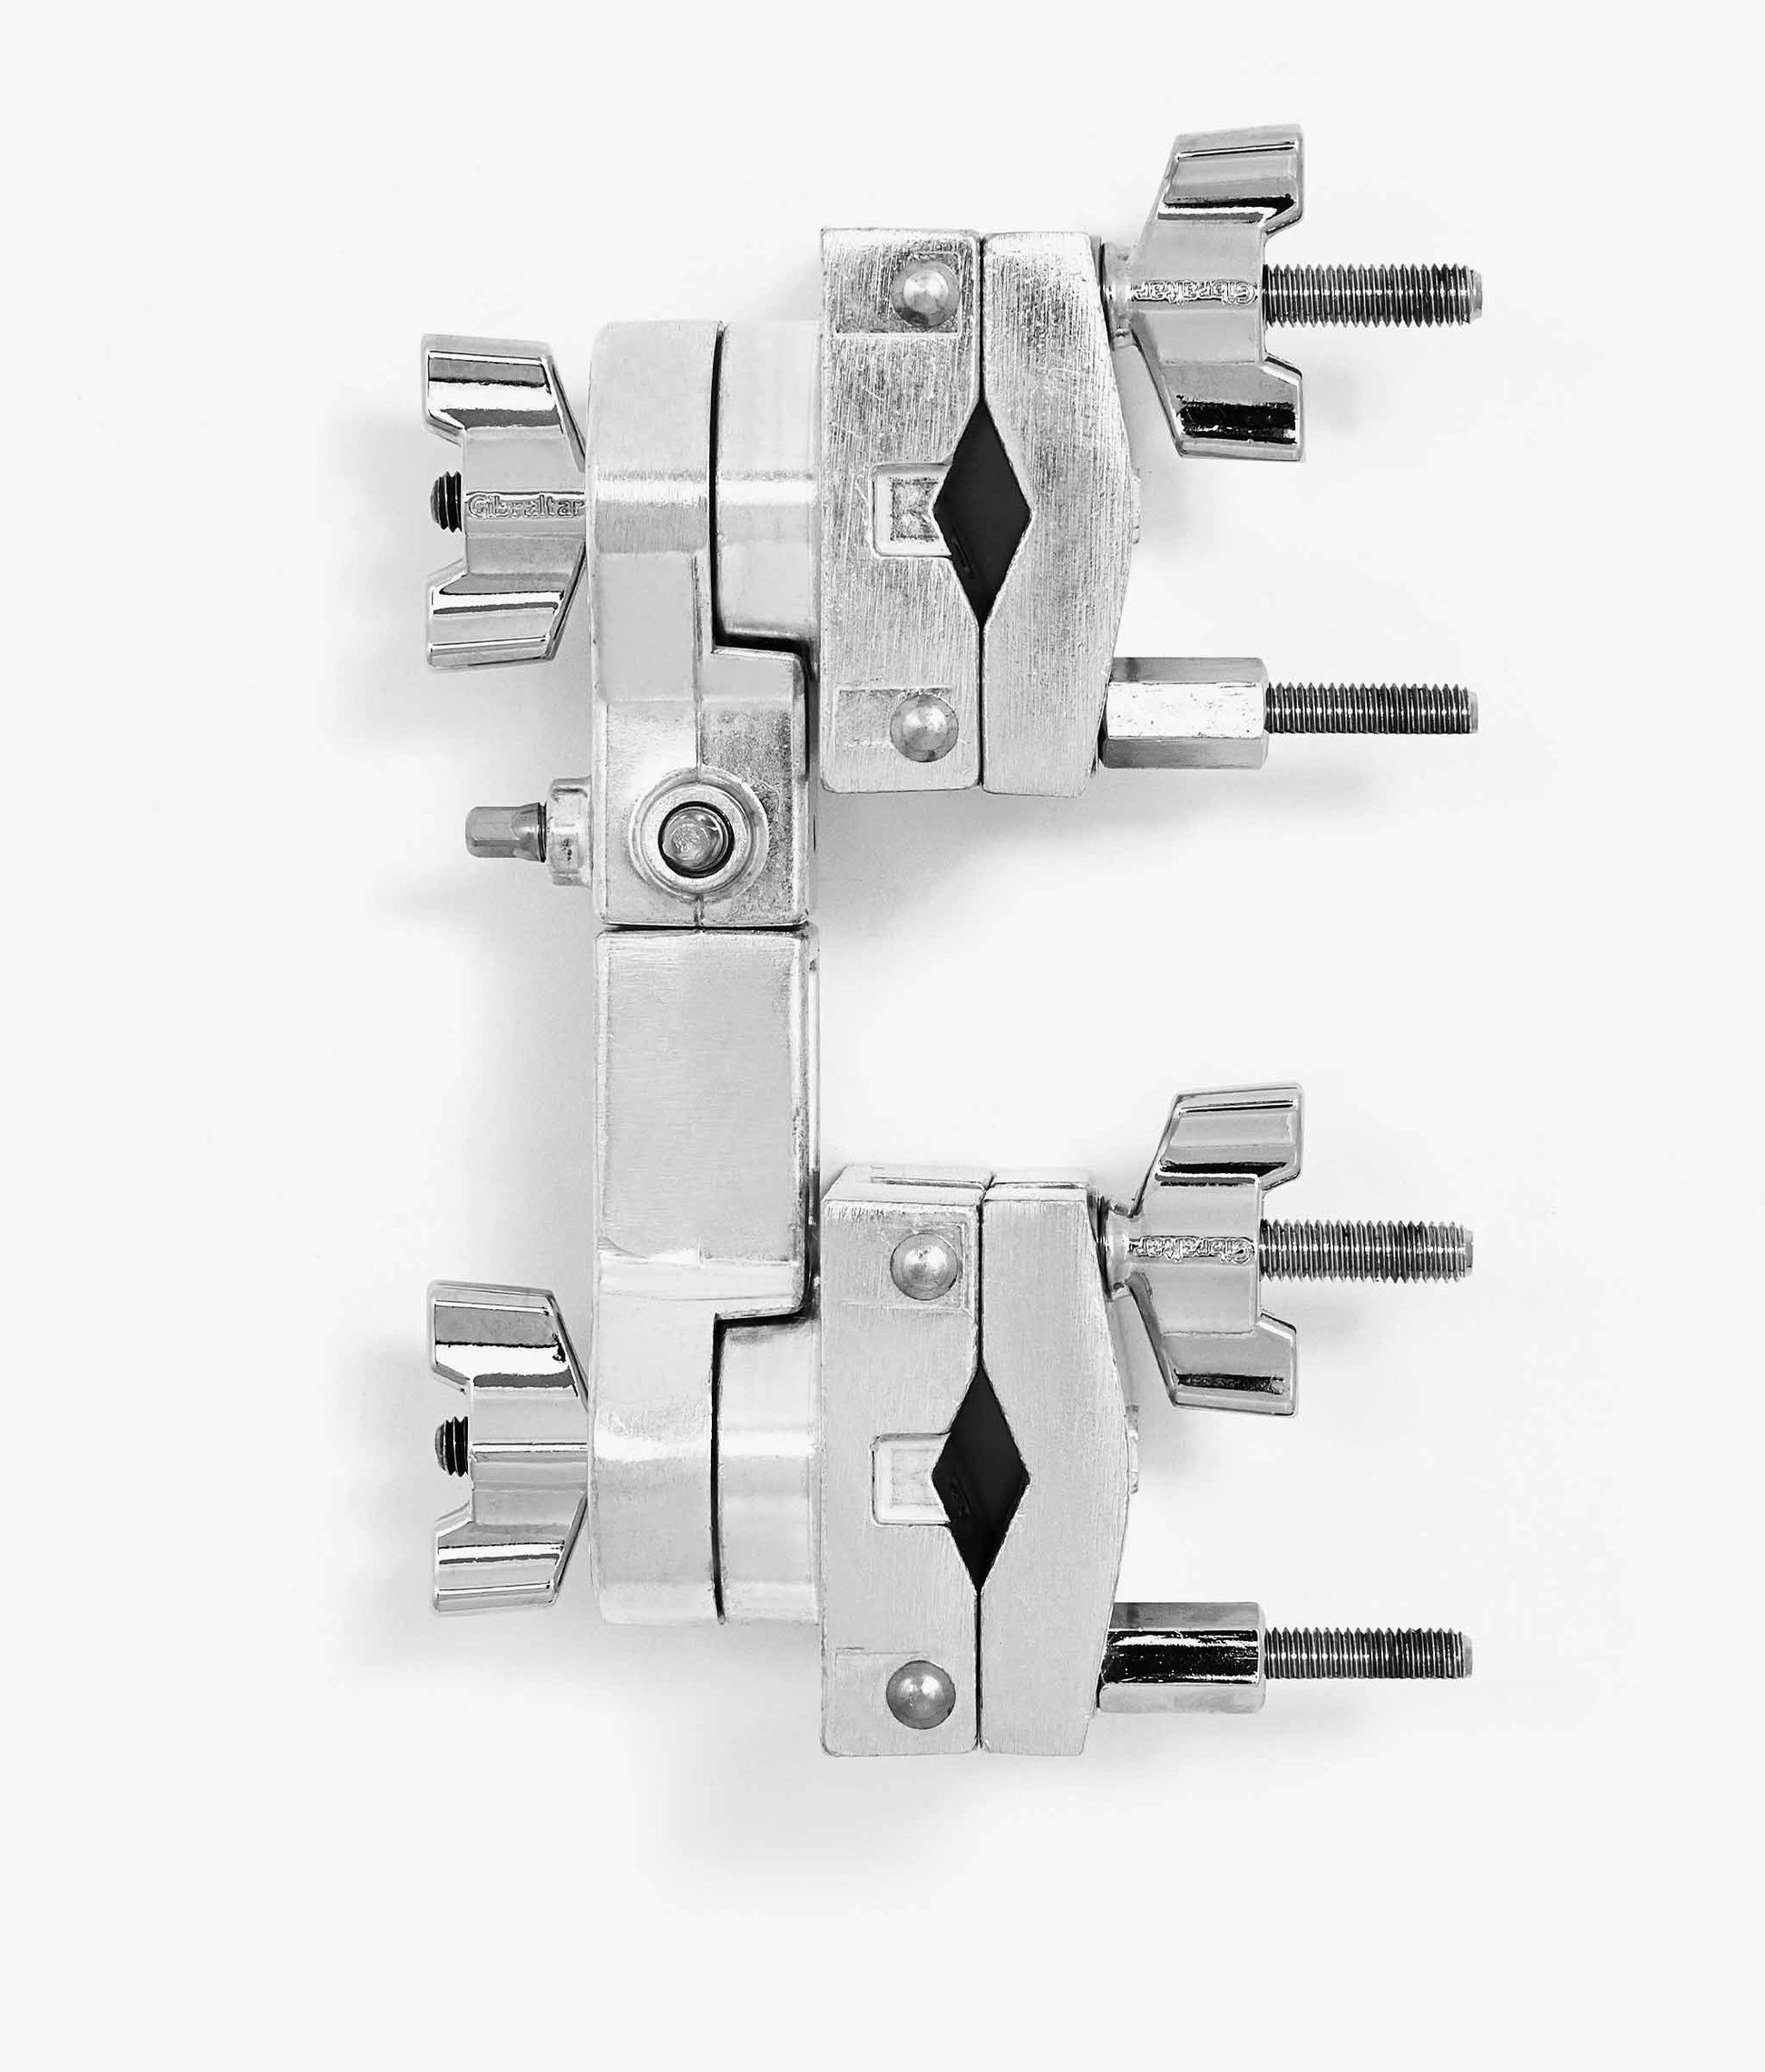  Gibraltar SC-SUGC 2-Way Adjustable Super Multi Clamp for Drum / Cymbal Stands & Holders 2 way multi clamp